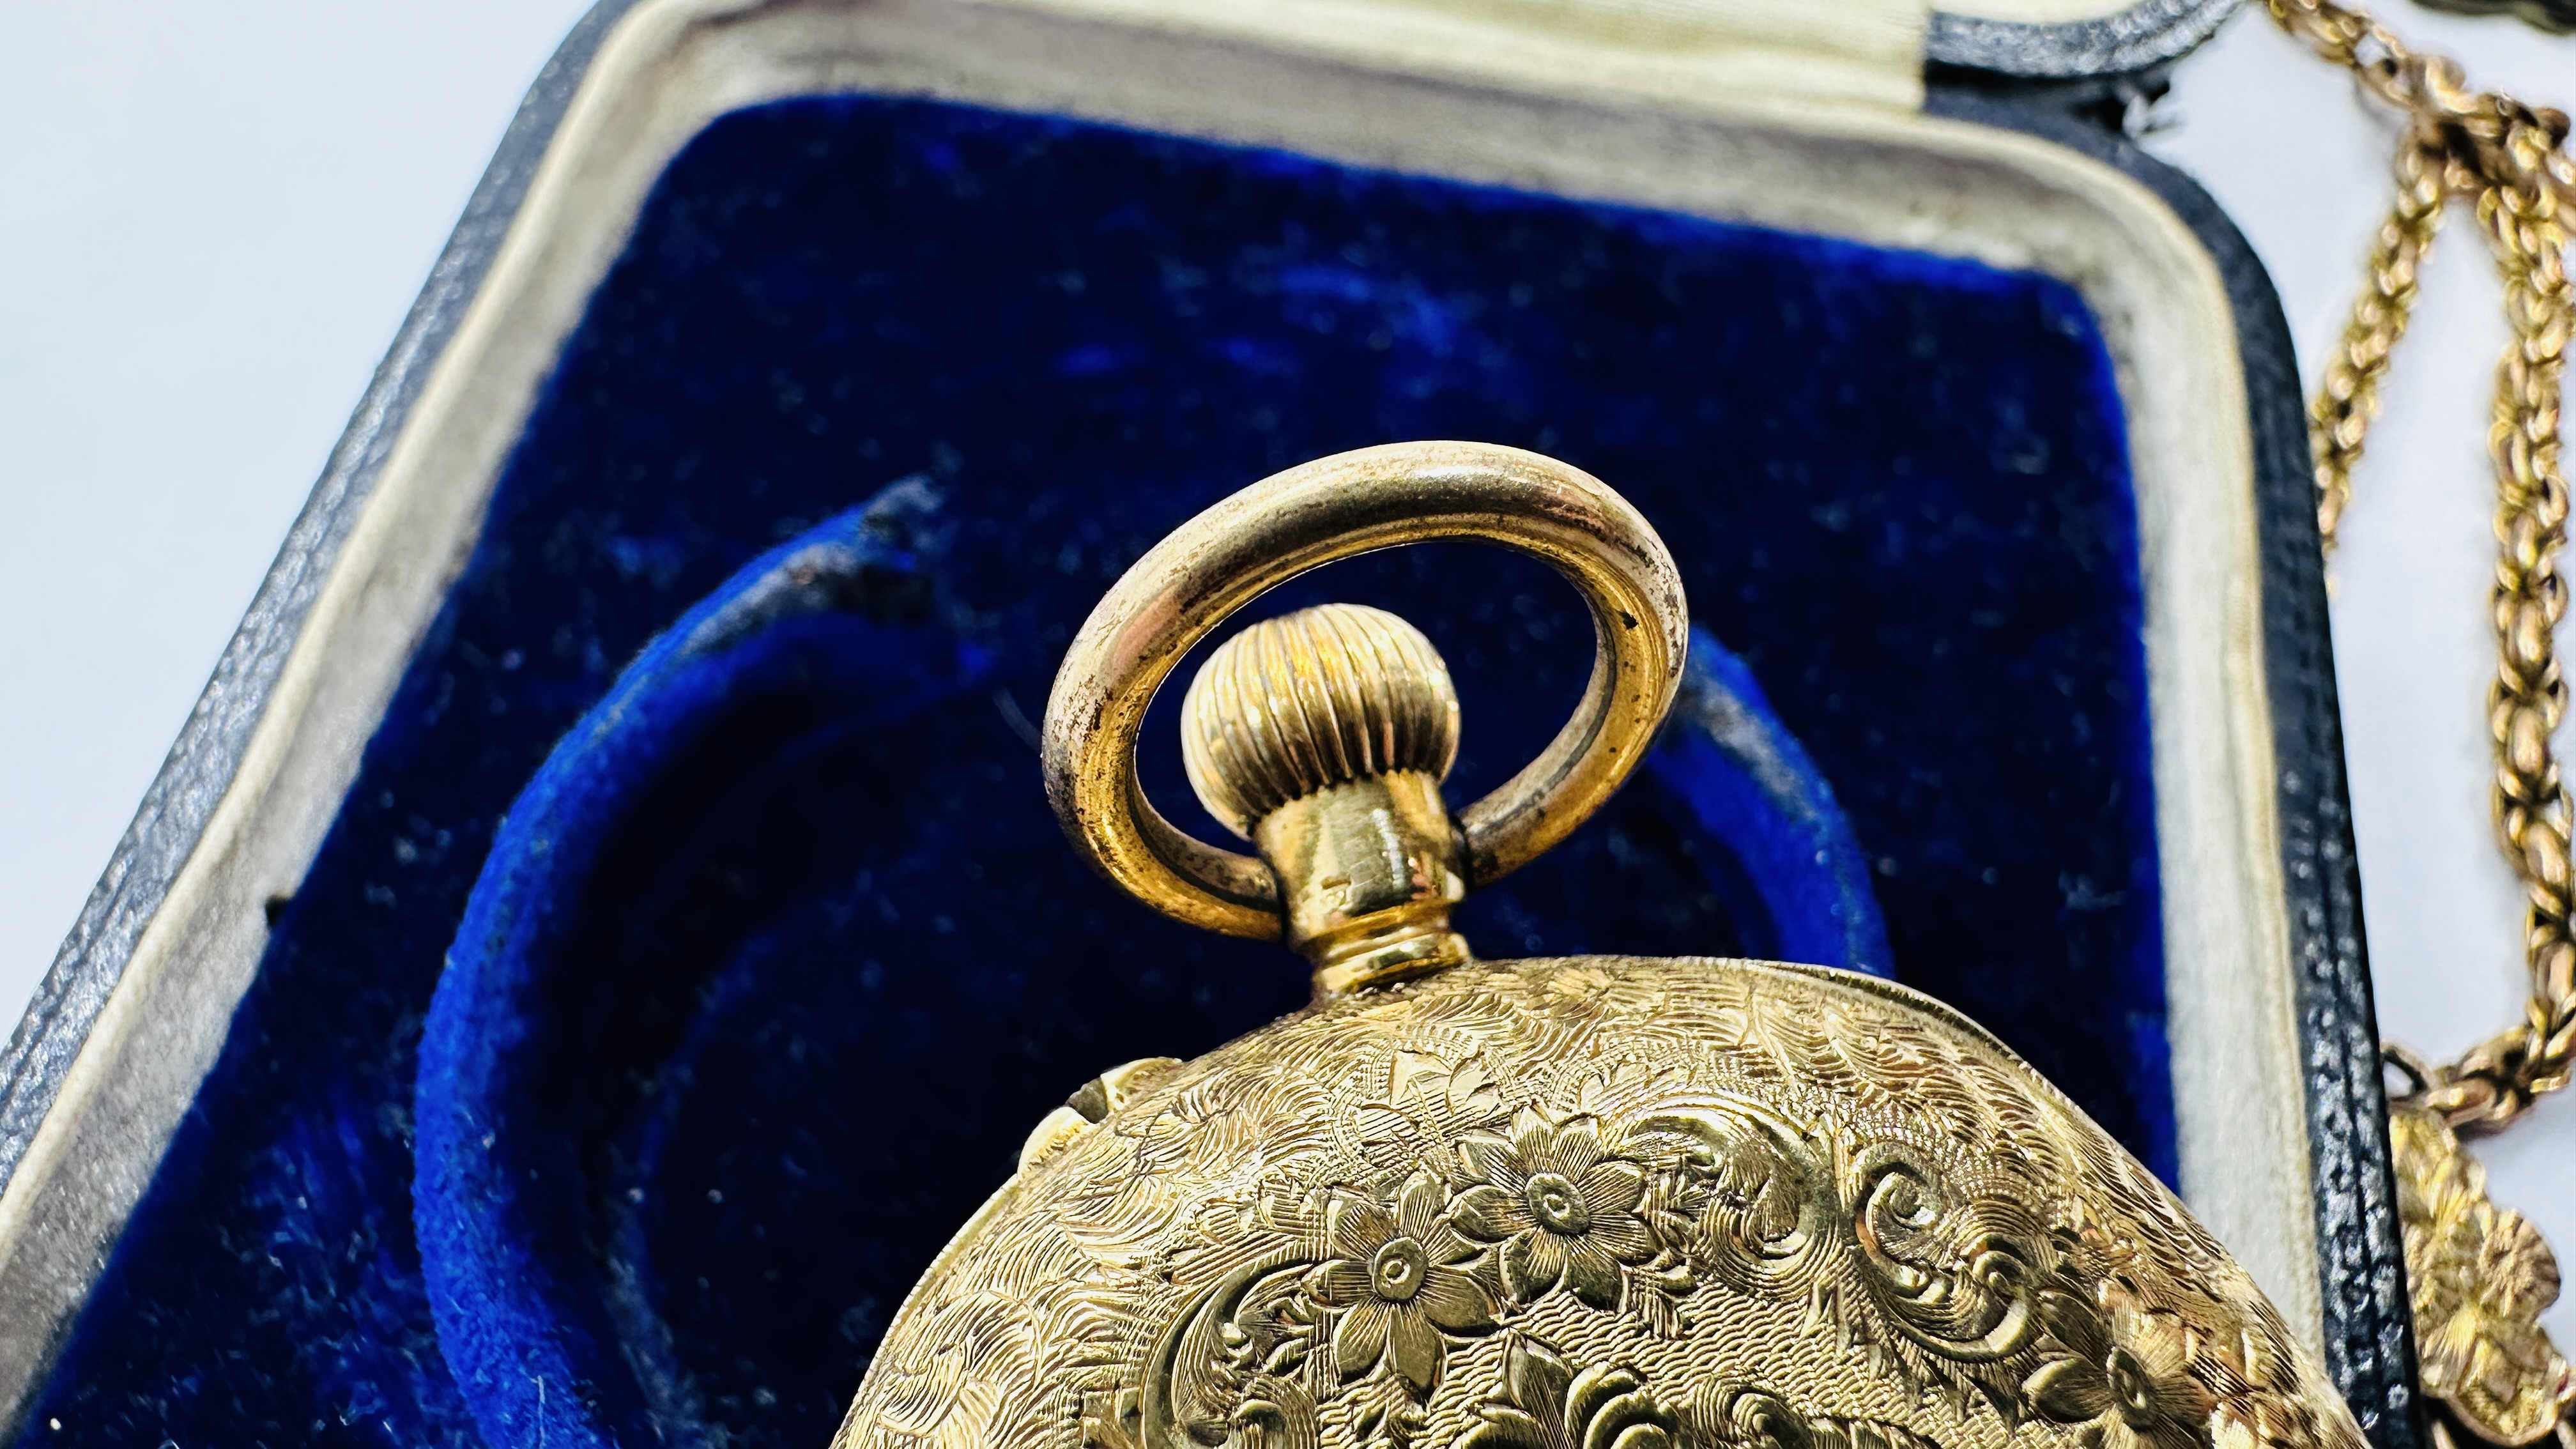 AN ELABORATE ANTIQUE 18CT GOLD CASED HALF HUNTER POCKET WATCH ALONG WITH A WOVEN WATCH CHAIN, - Image 11 of 17